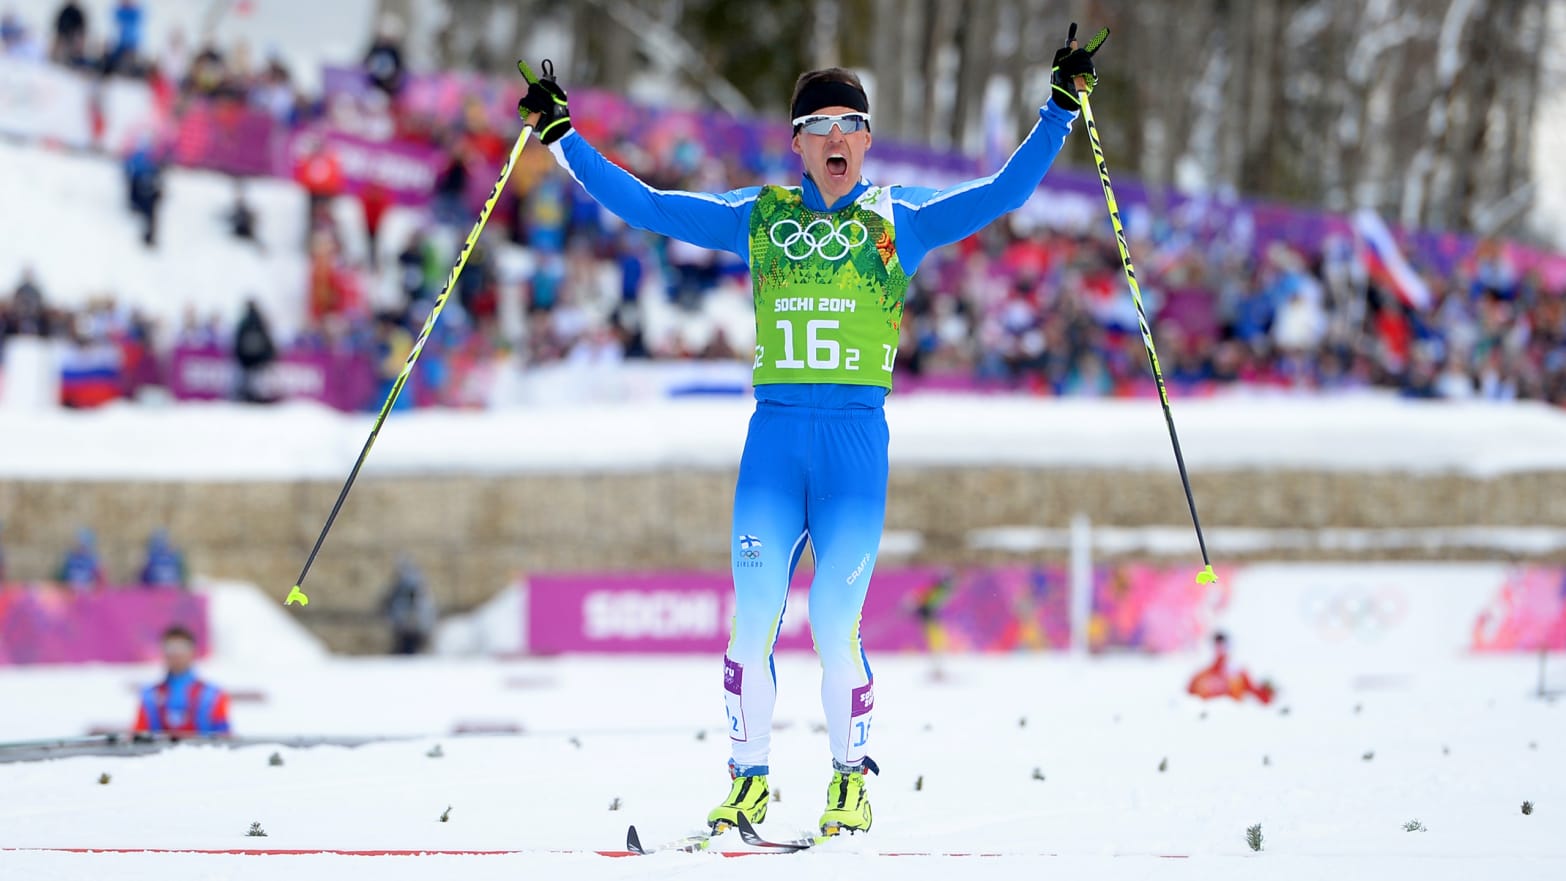 How To Watch the Olympic Biathlon at the 2018 Olympics Full Schedule